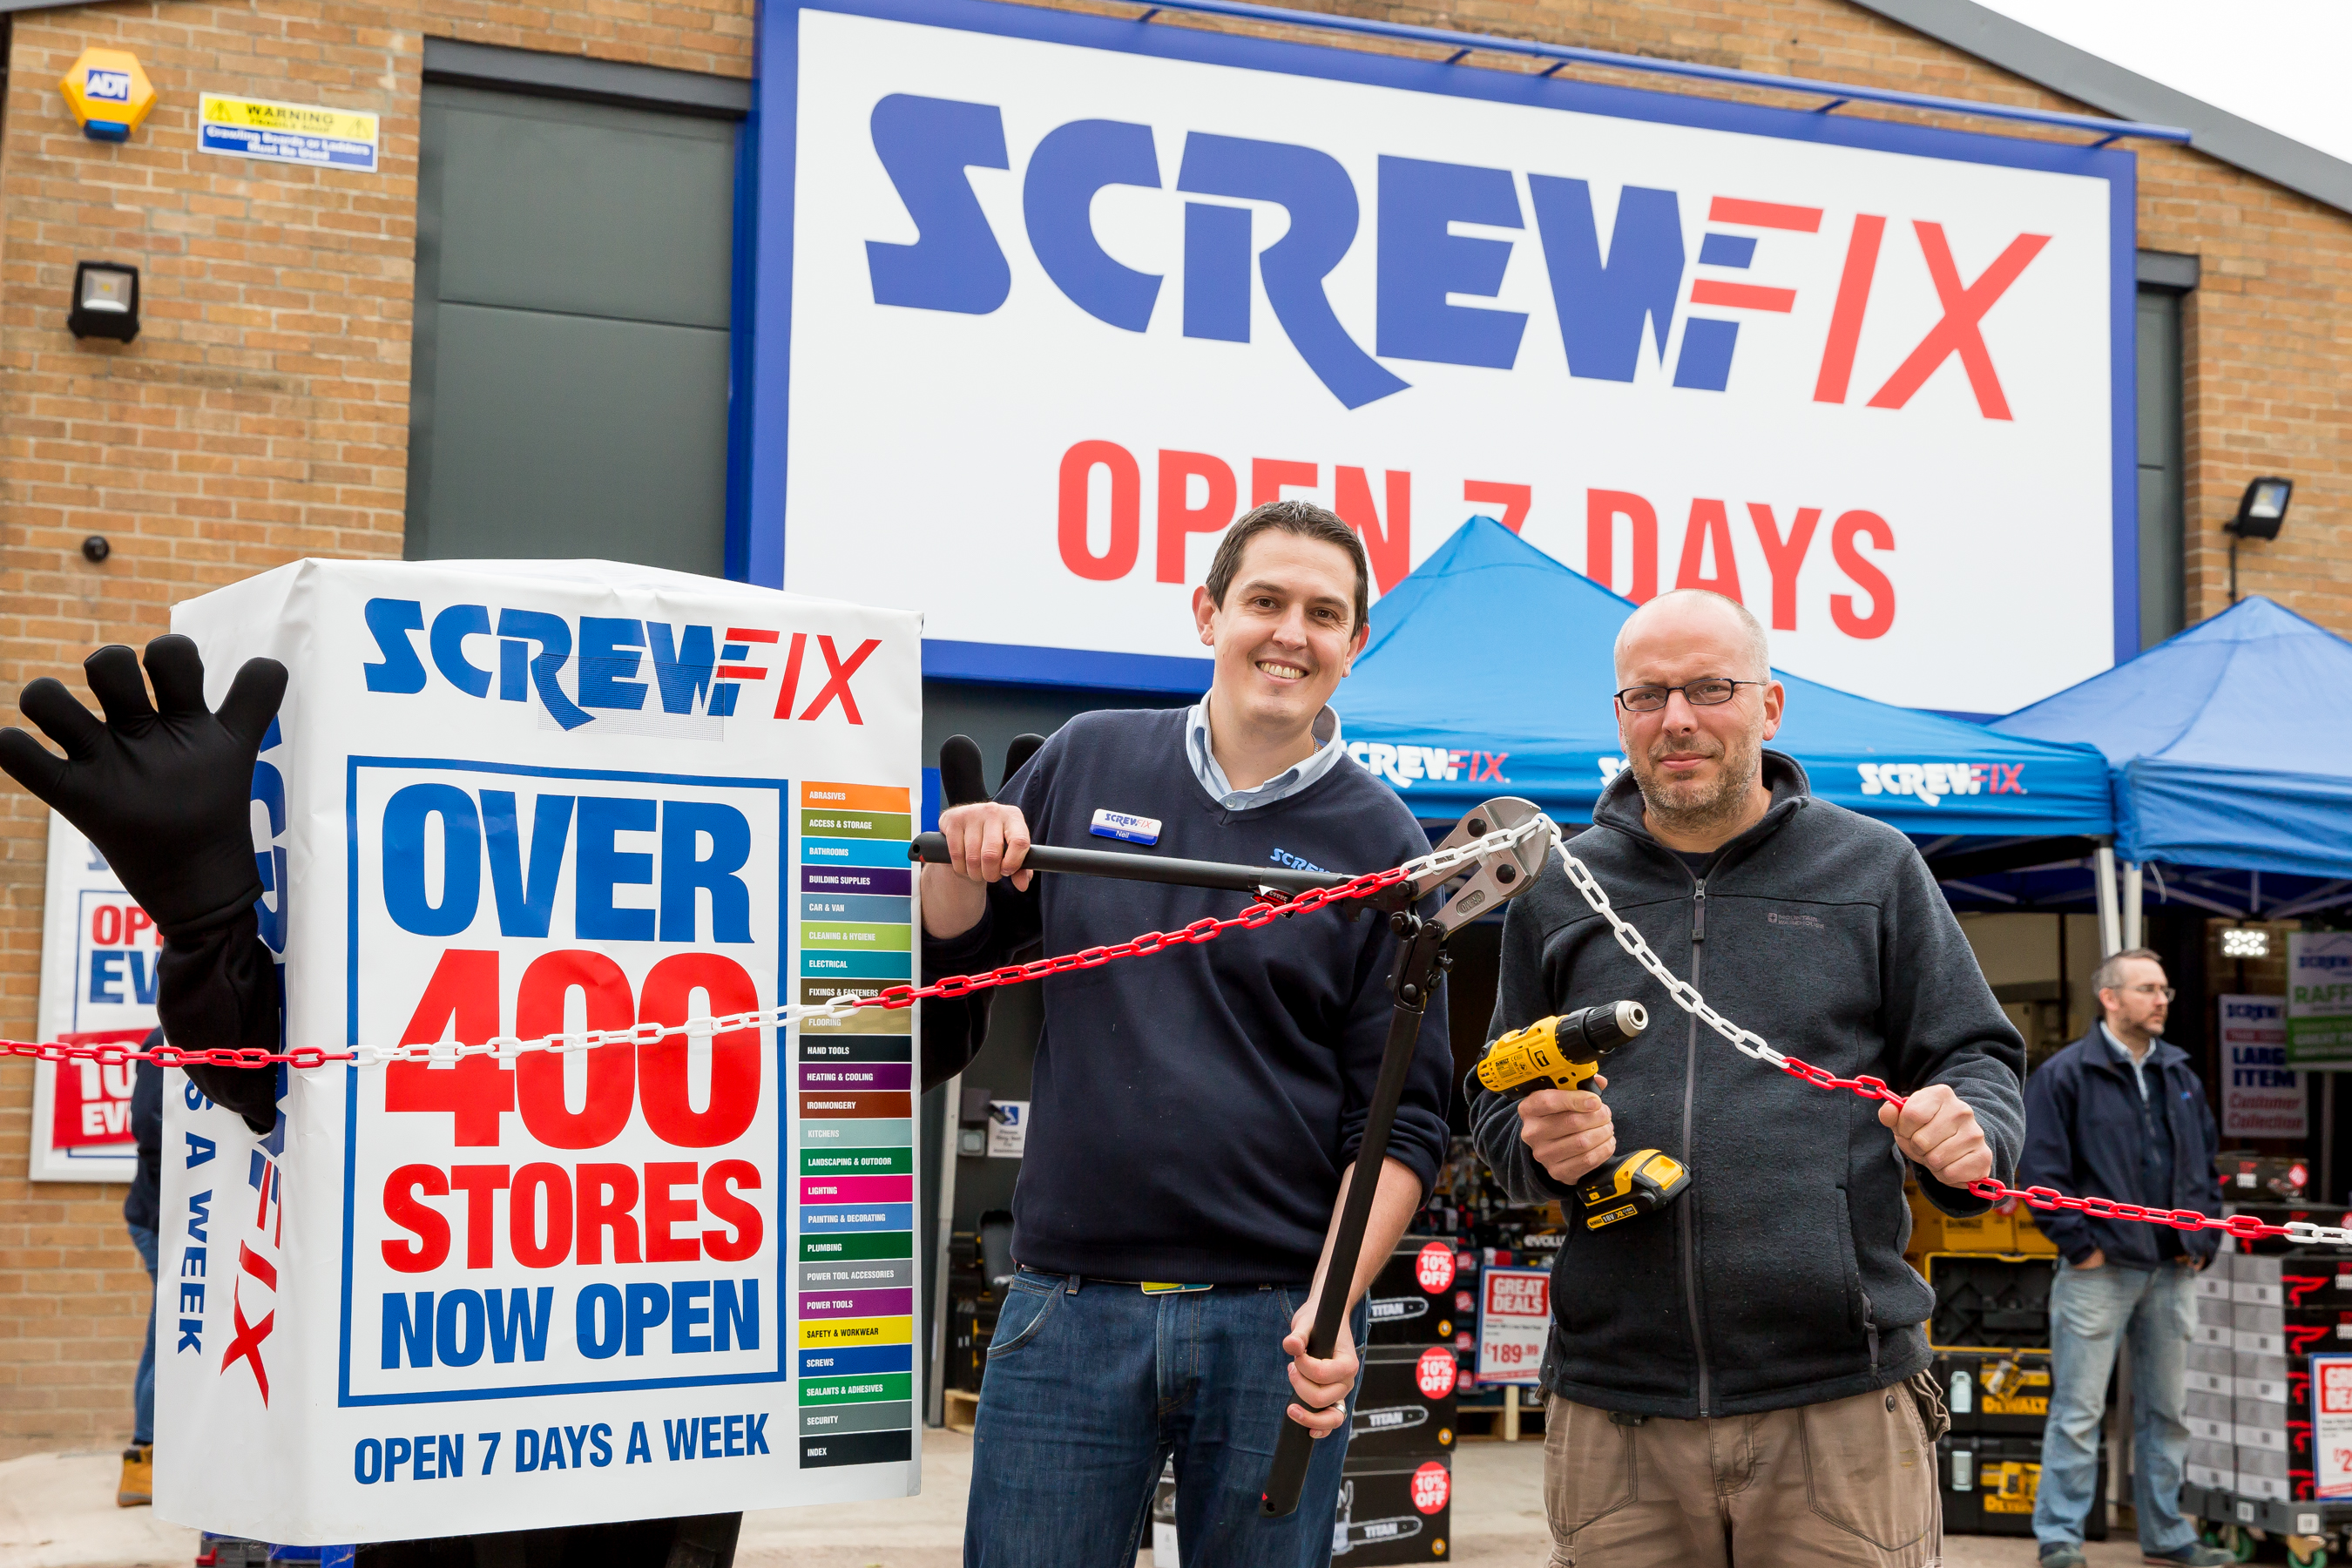 Taunton’s second Screwfix store is declared a runaway success